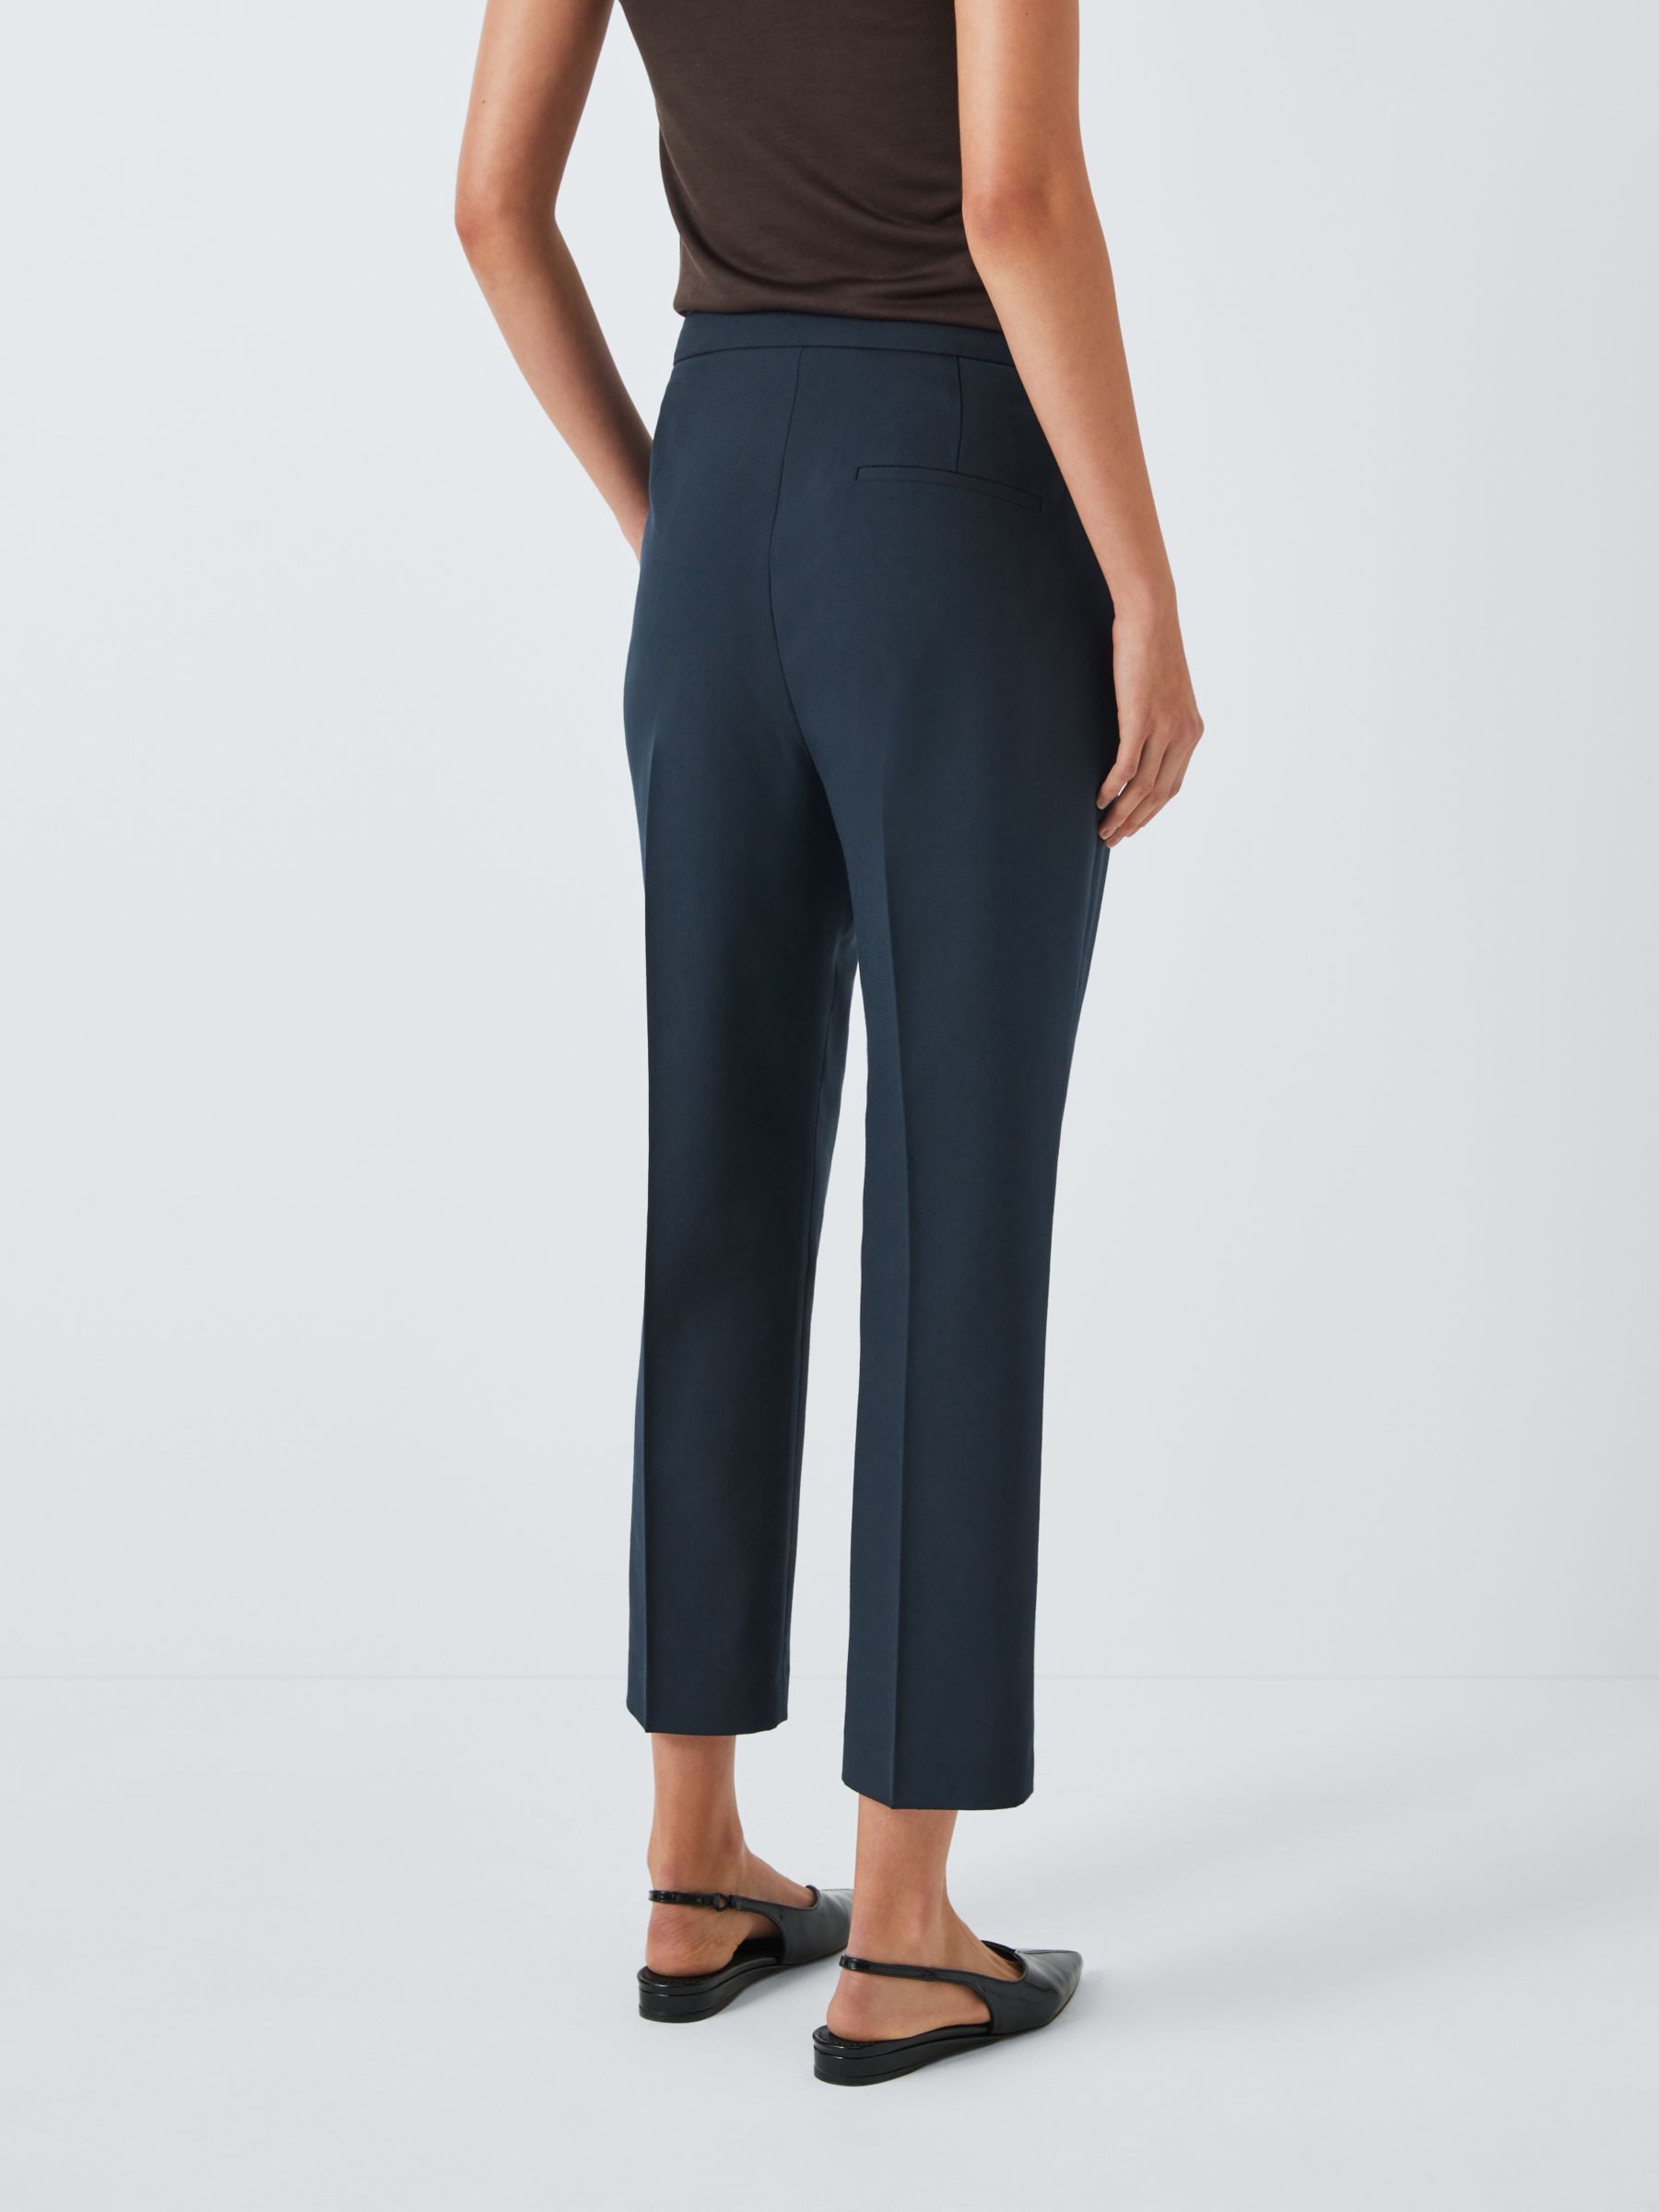 Theory Slim Leg Cropped Trousers, Nocturne Navy, 8